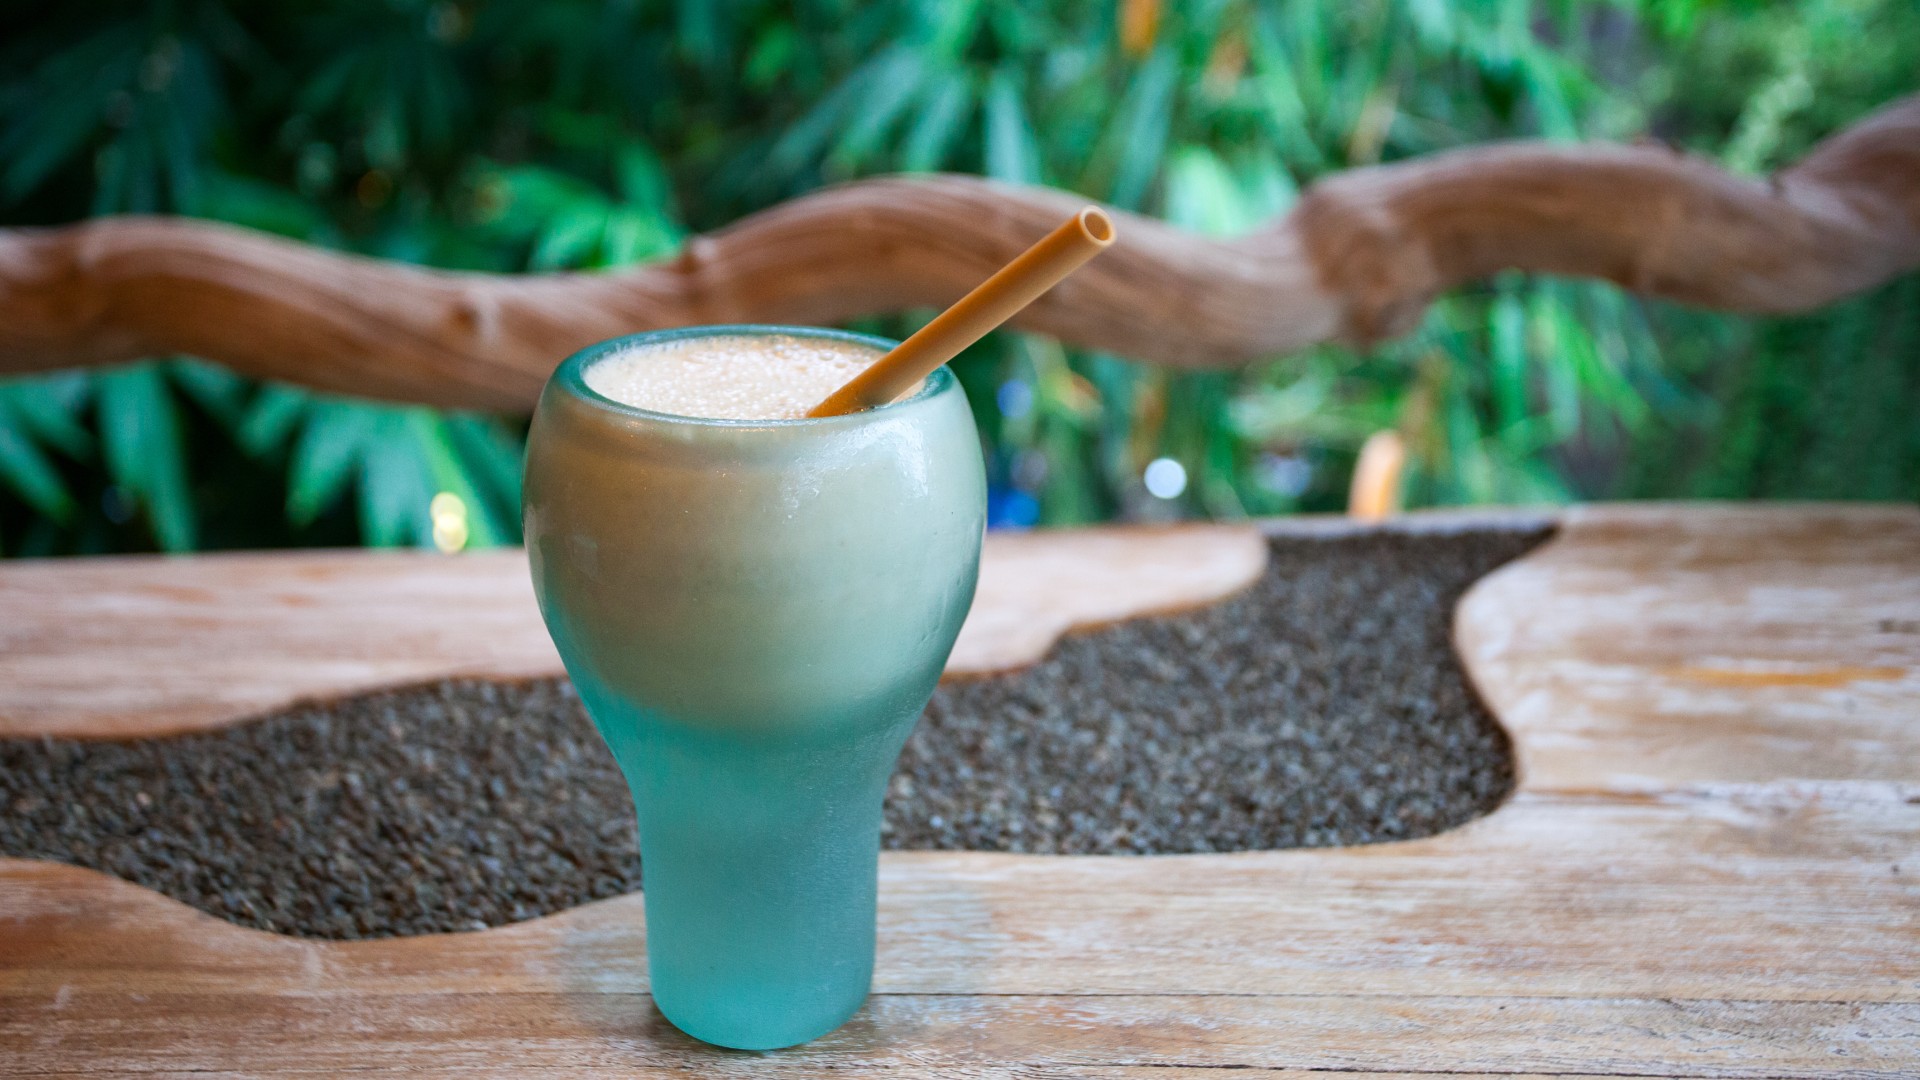 What You Know Need To Know About Bamboo And Bamboo Straw